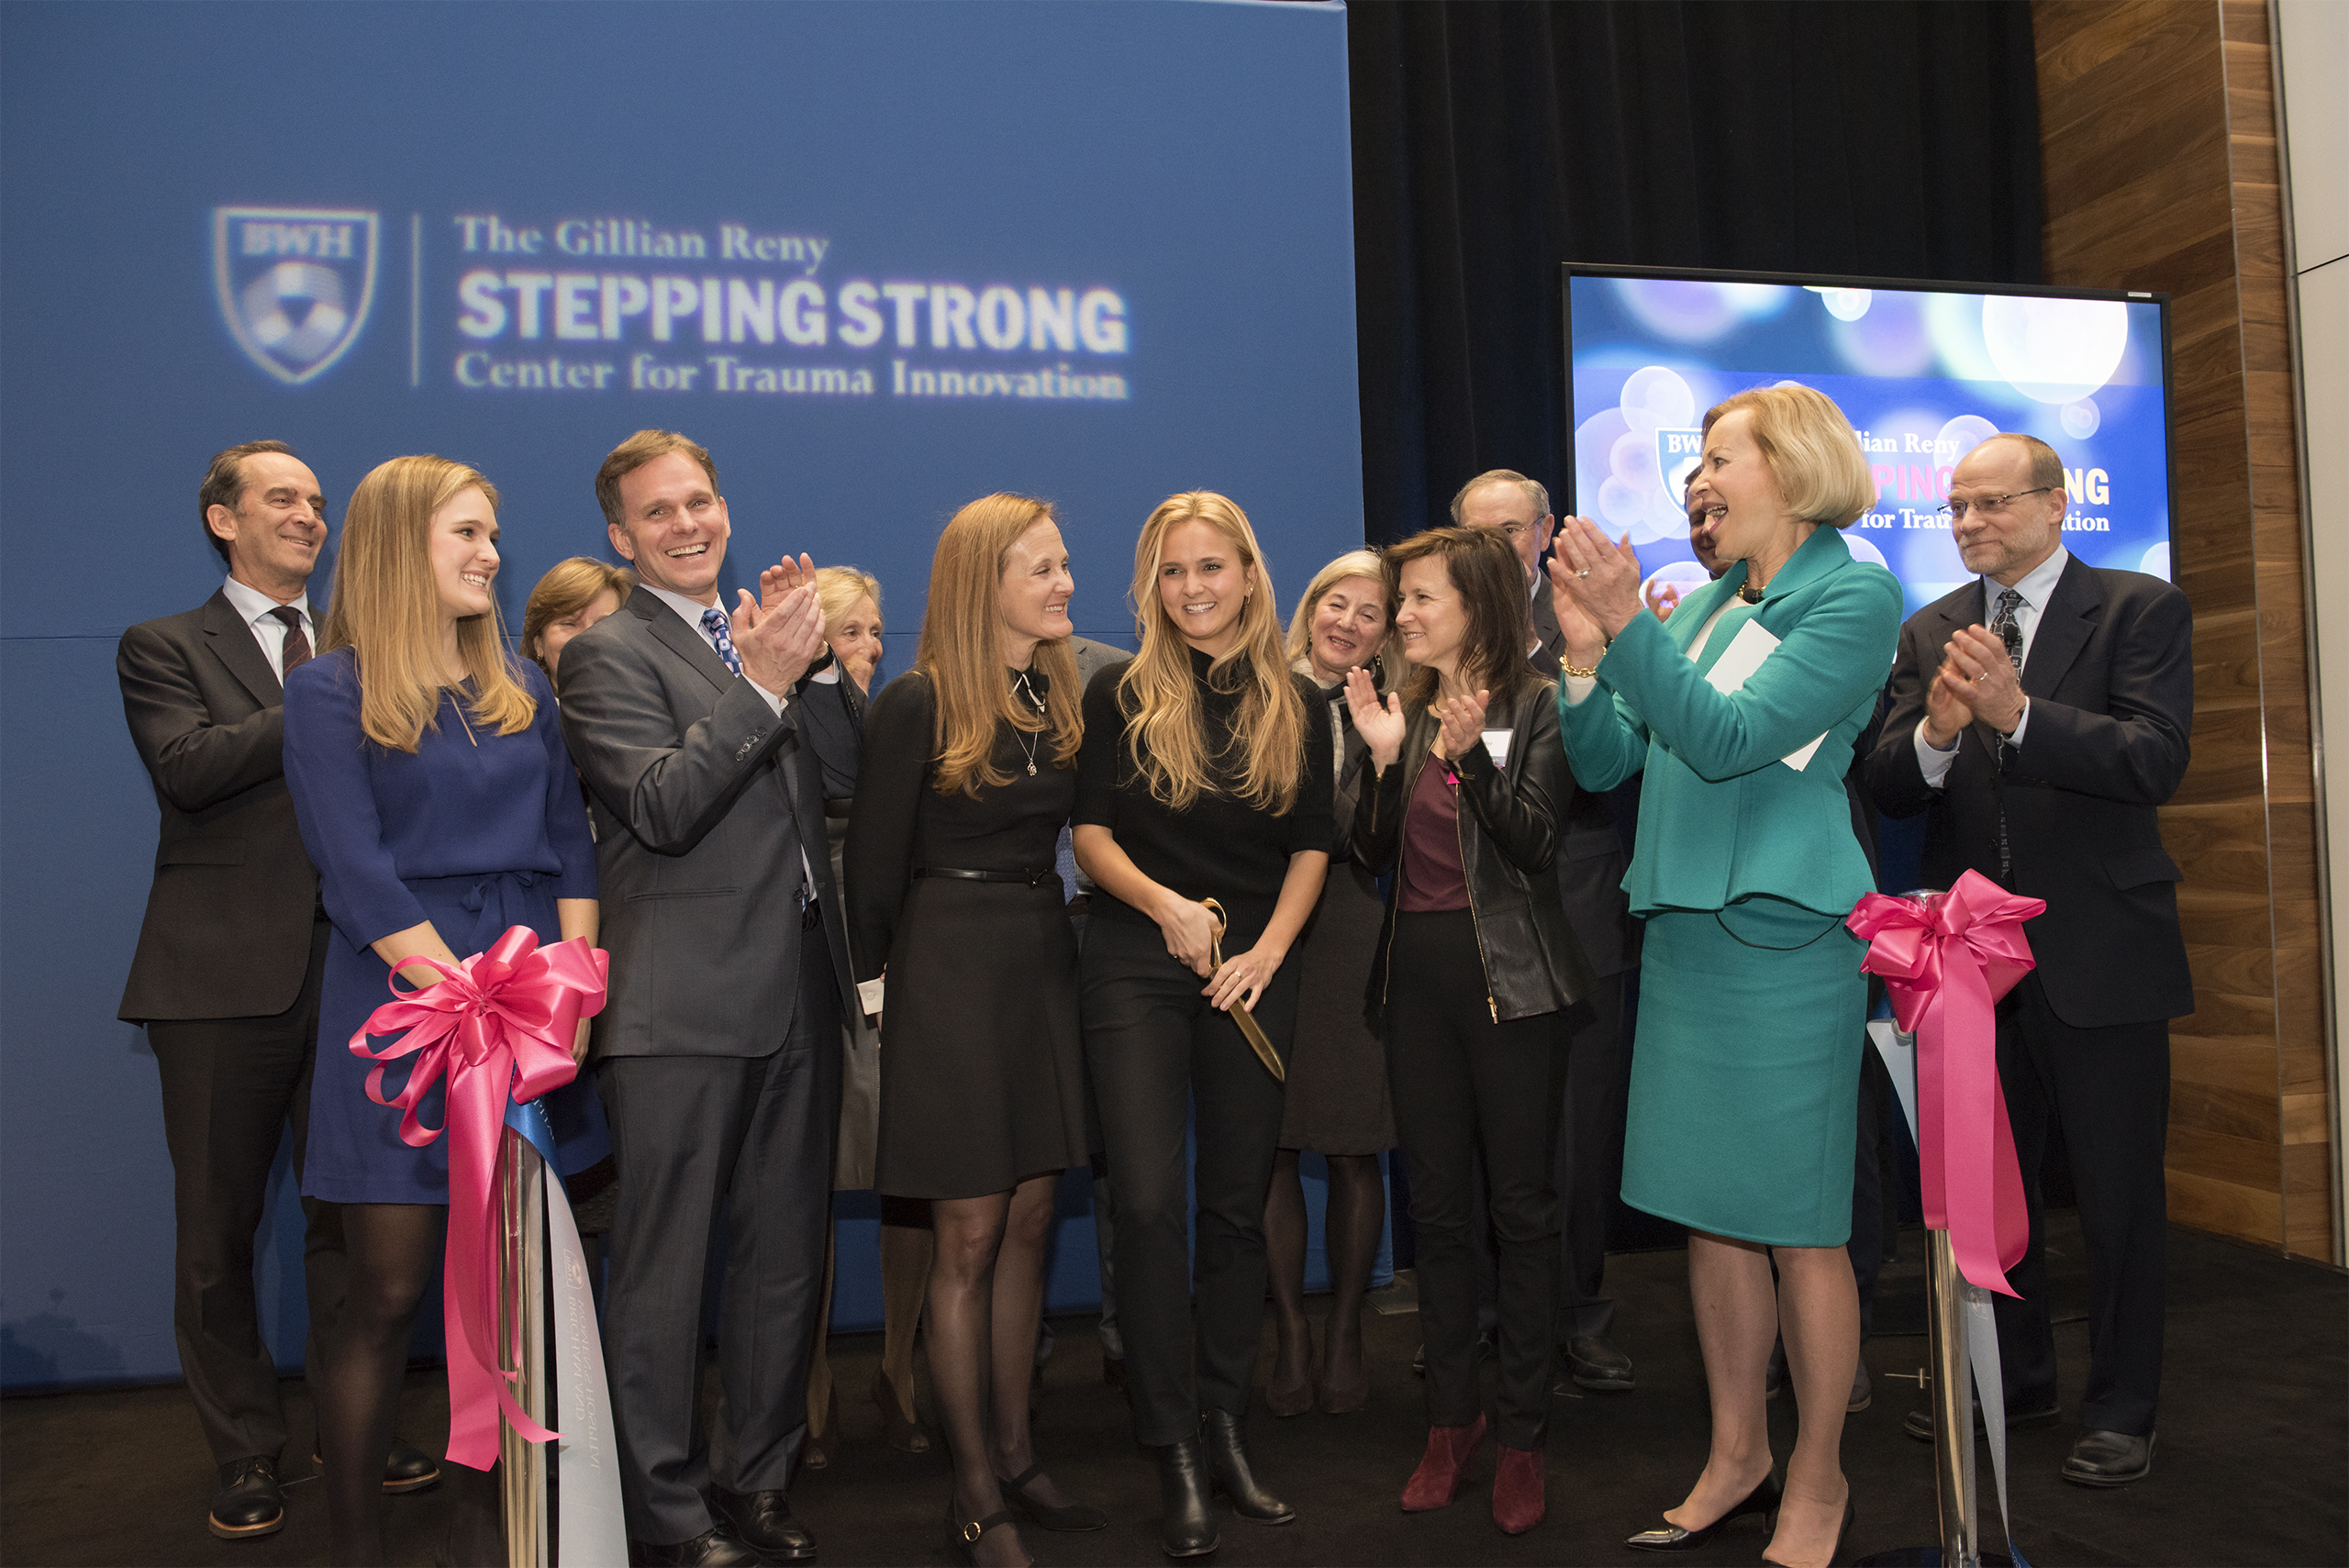 Audrey Reny Epstein And Her Family Celebrate The Establishment Of The Gillian Reny Stepping Strong Center For Trauma Innovation At Brigham And Women’s Hospital